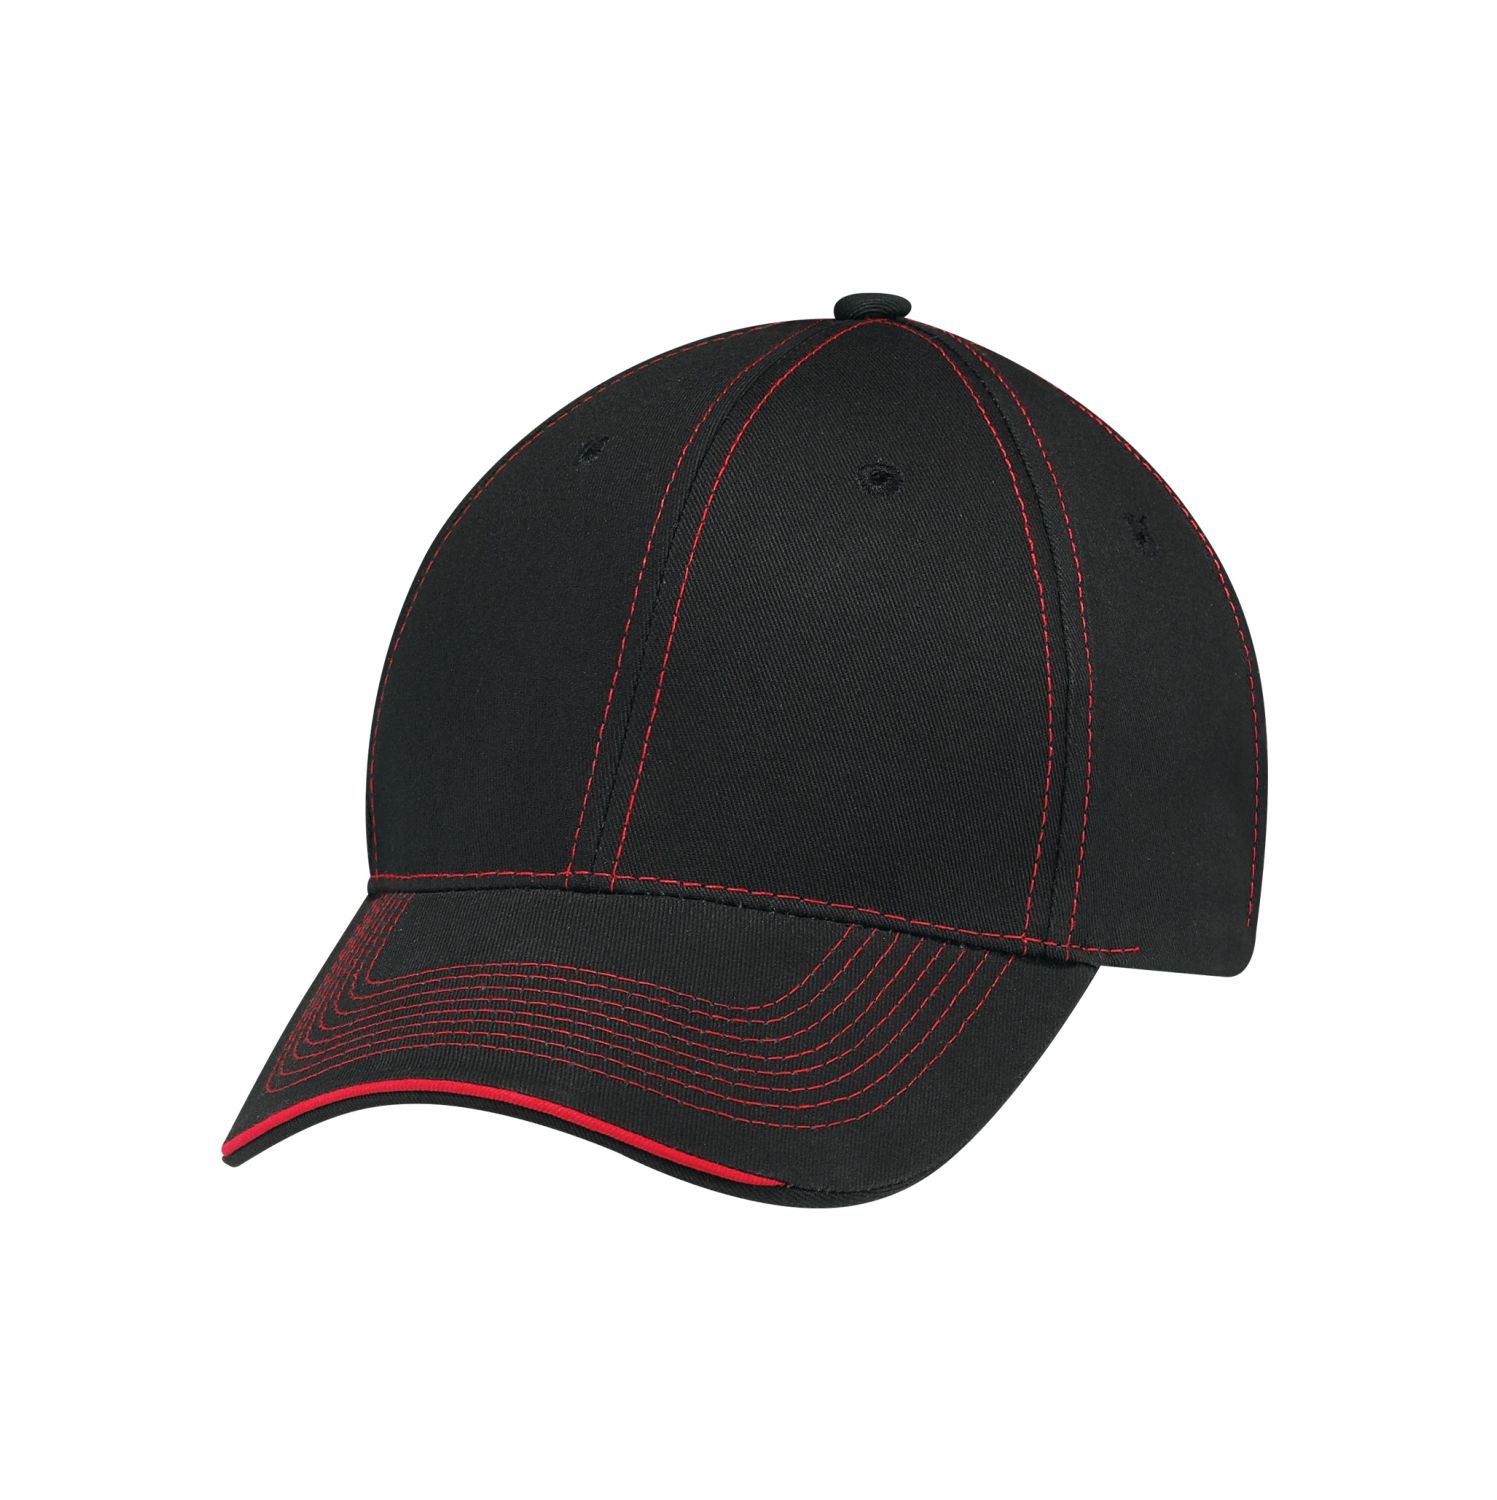 AJM 6-Panel Constructed Full-Fit Hat #6F617M Black / Red